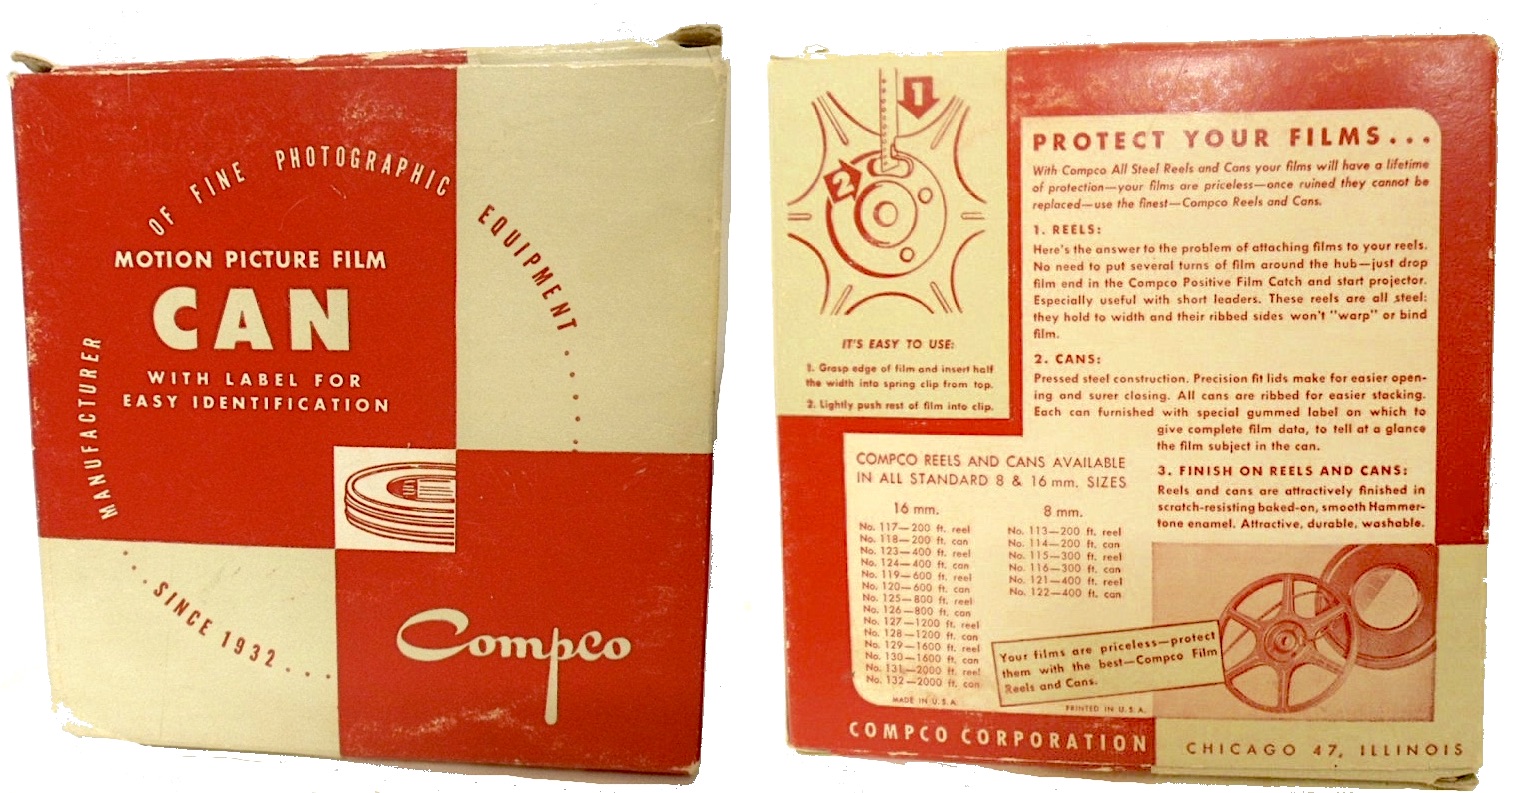 Compco Corp., est. 1940s - Made-in-Chicago Museum